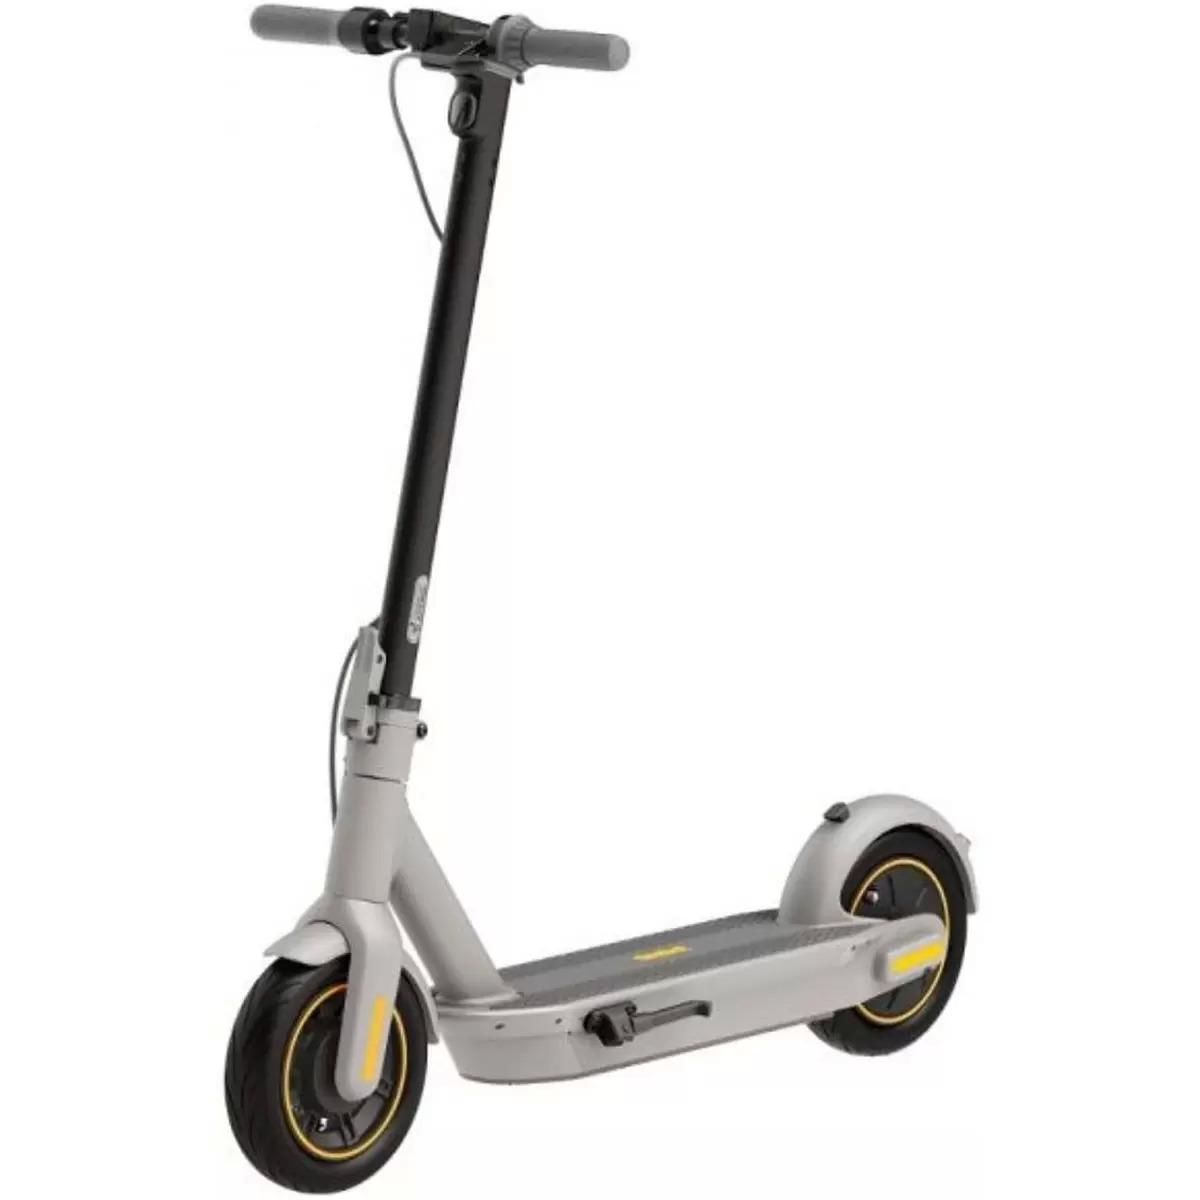 Segway Ninebot G30LP Max Electric Kick Scooter for $594.99